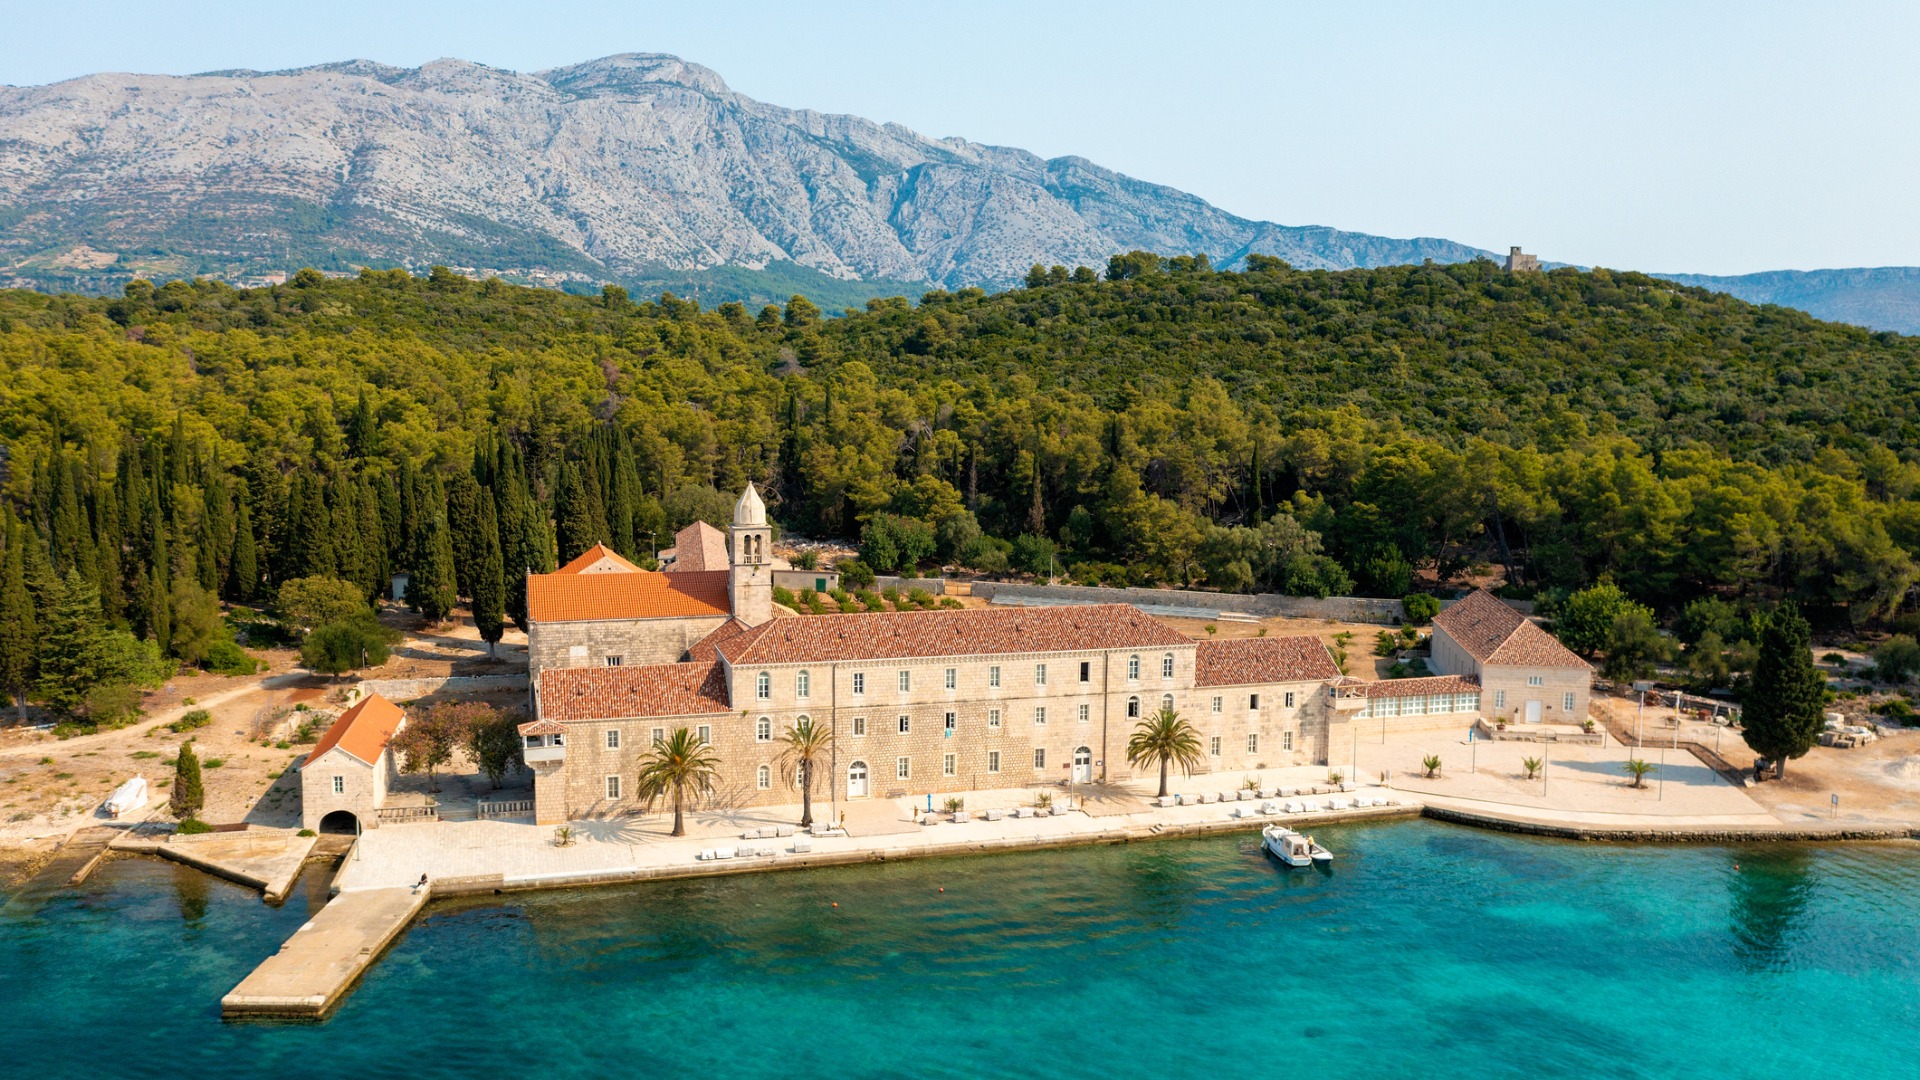 This image shows the Franciscan monastery surrounded by a thick forest and insanely clear turquoise waters.